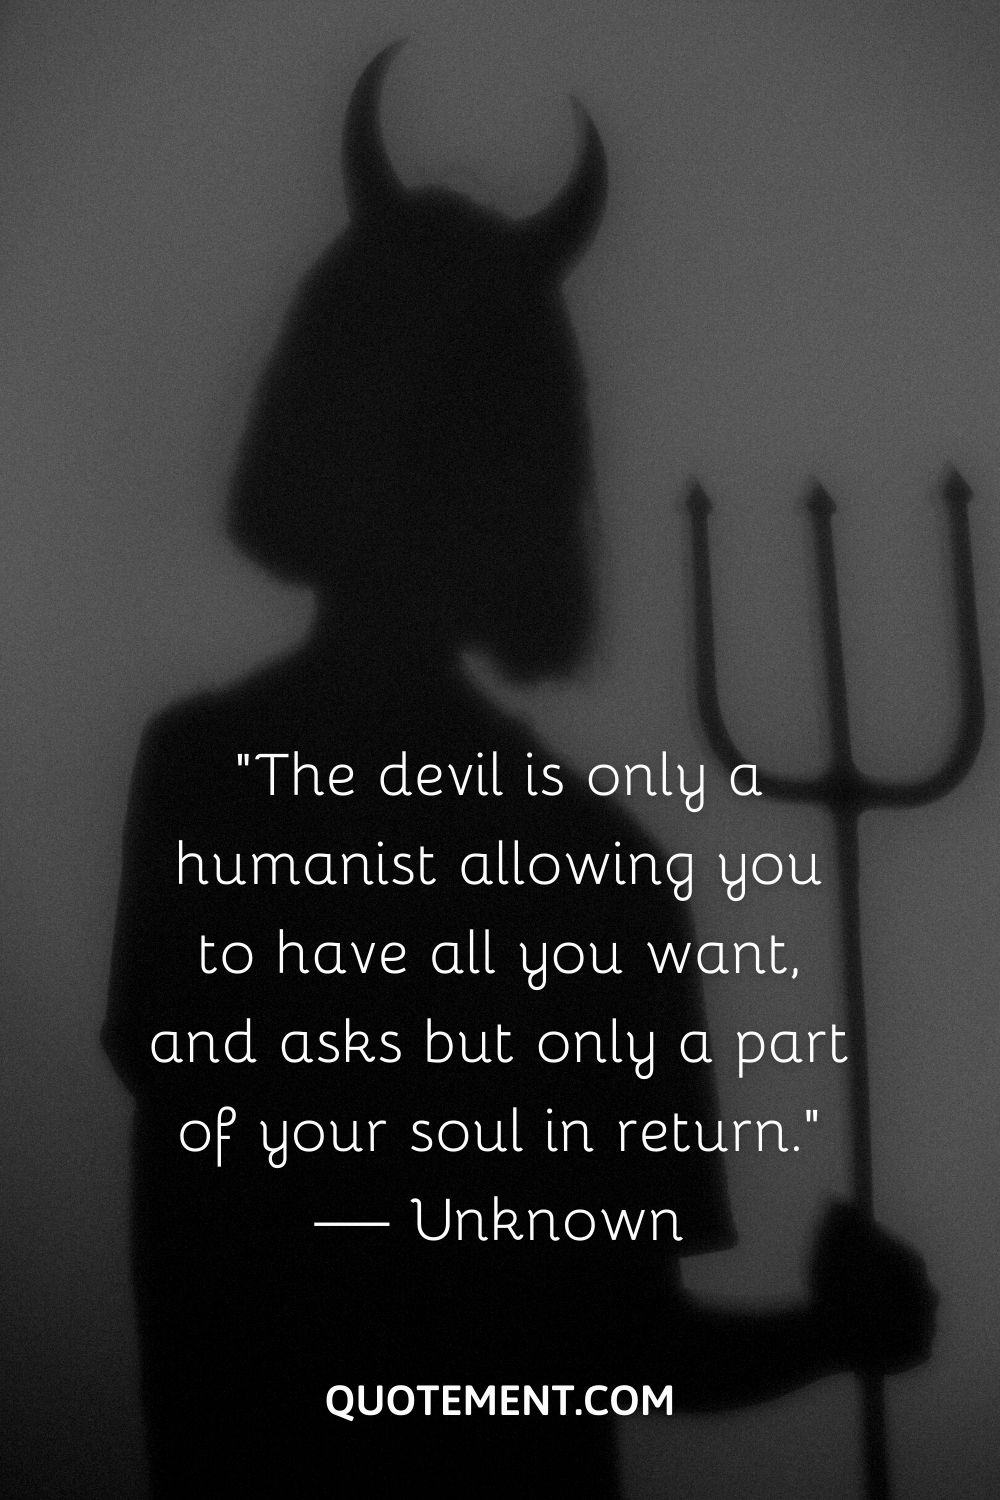 “The devil is only a humanist allowing you to have all you want, and asks but only a part of your soul in return.” — Unknown